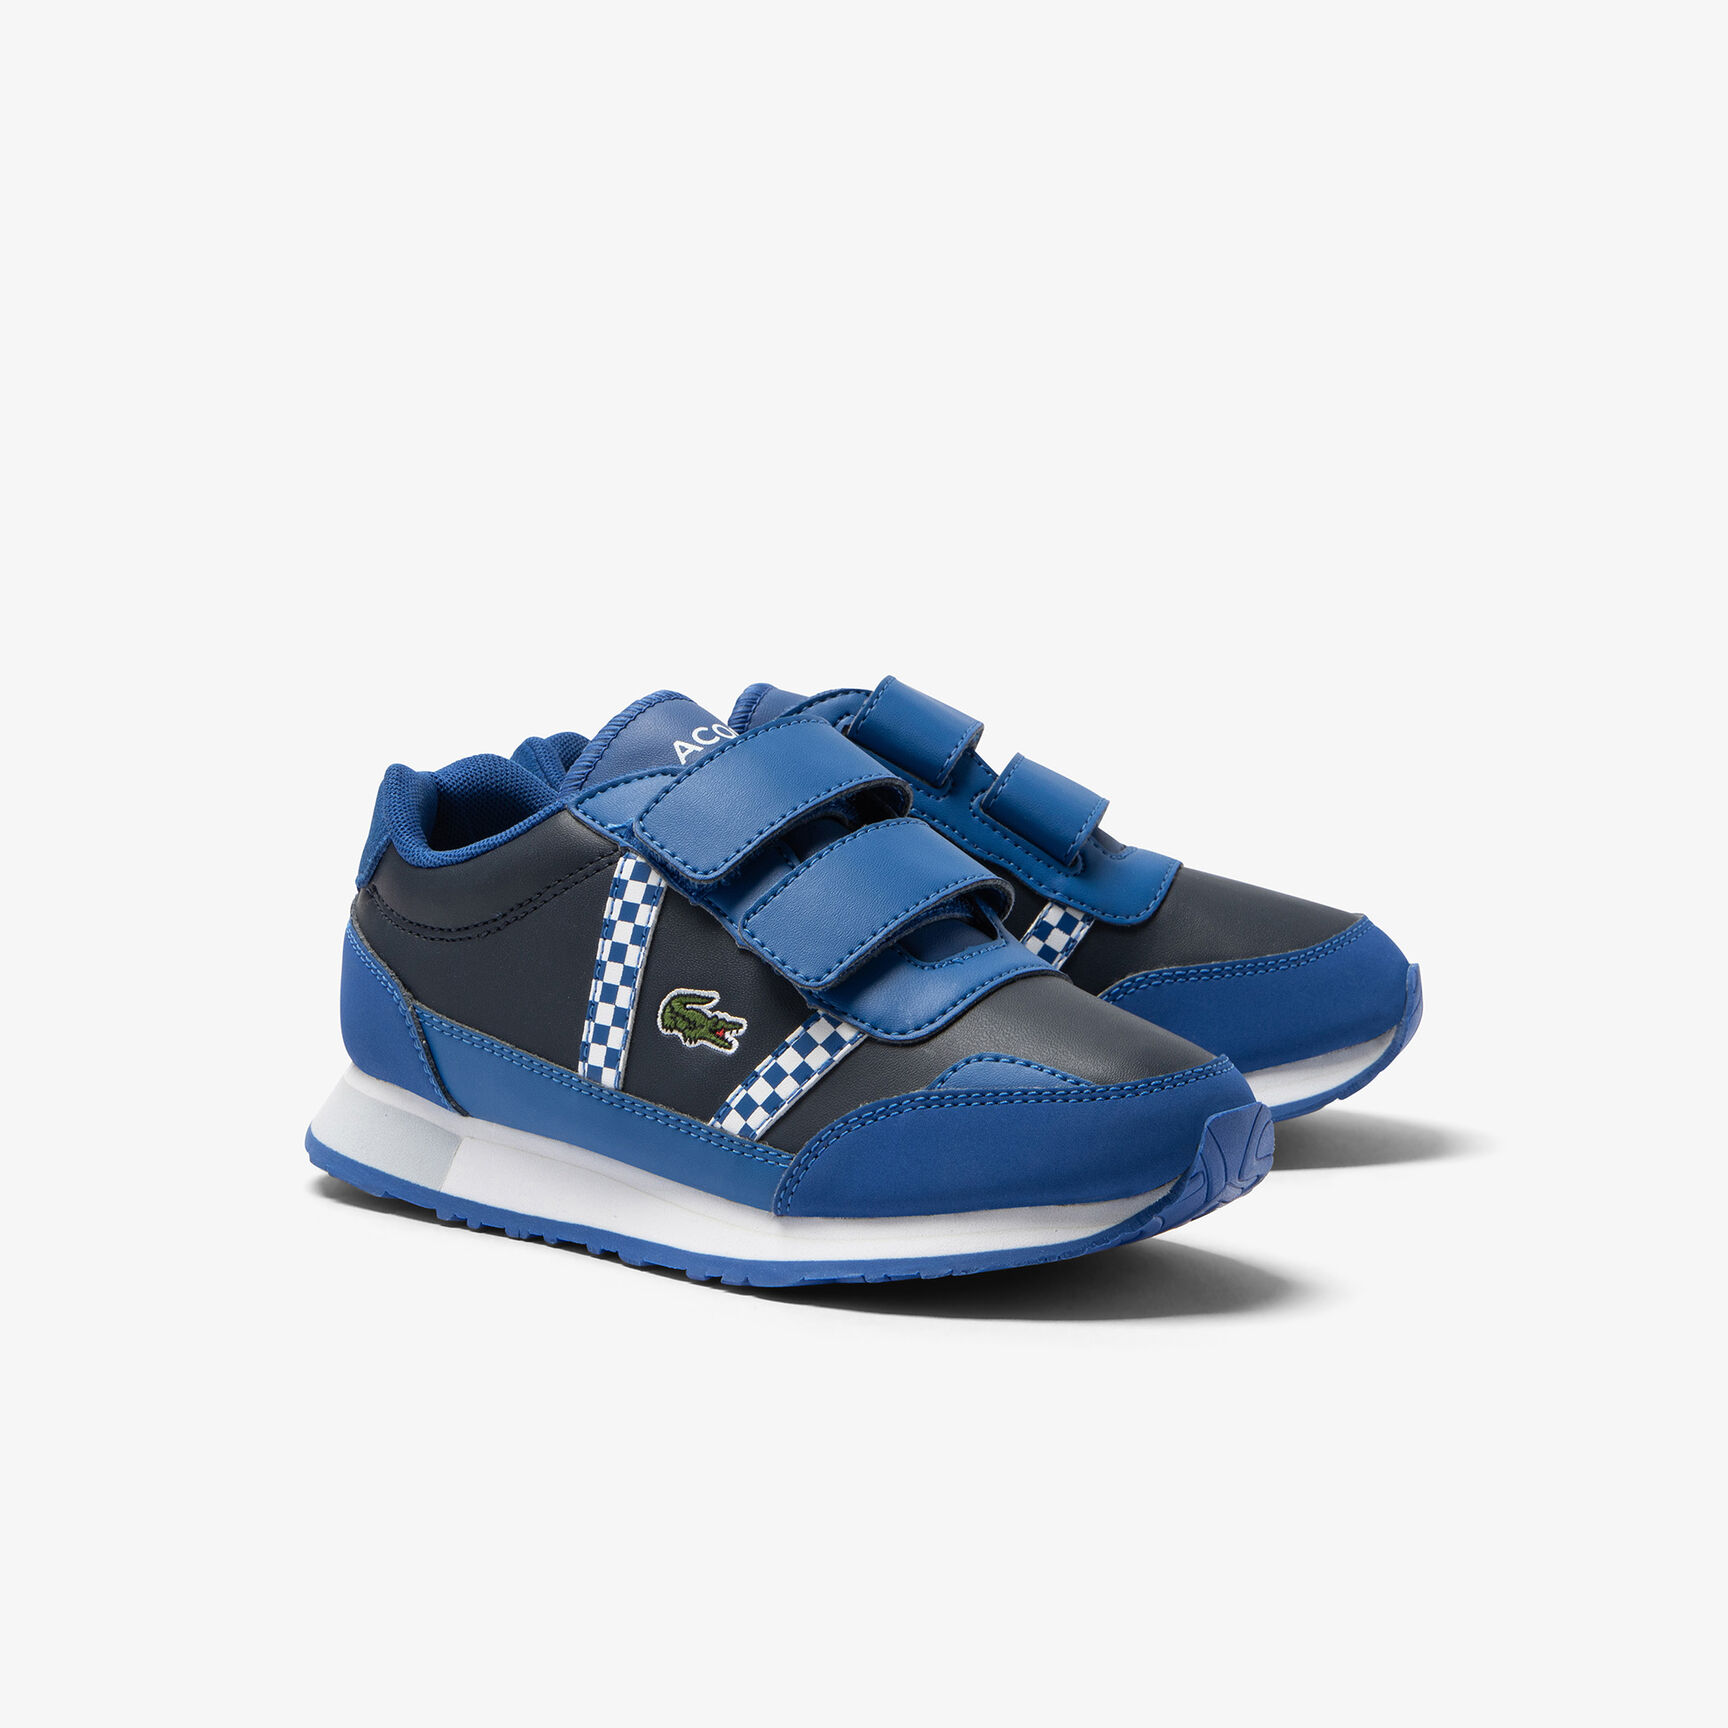 Buy Children's Lacoste Partner Synthetic Trainers | Lacoste UAE